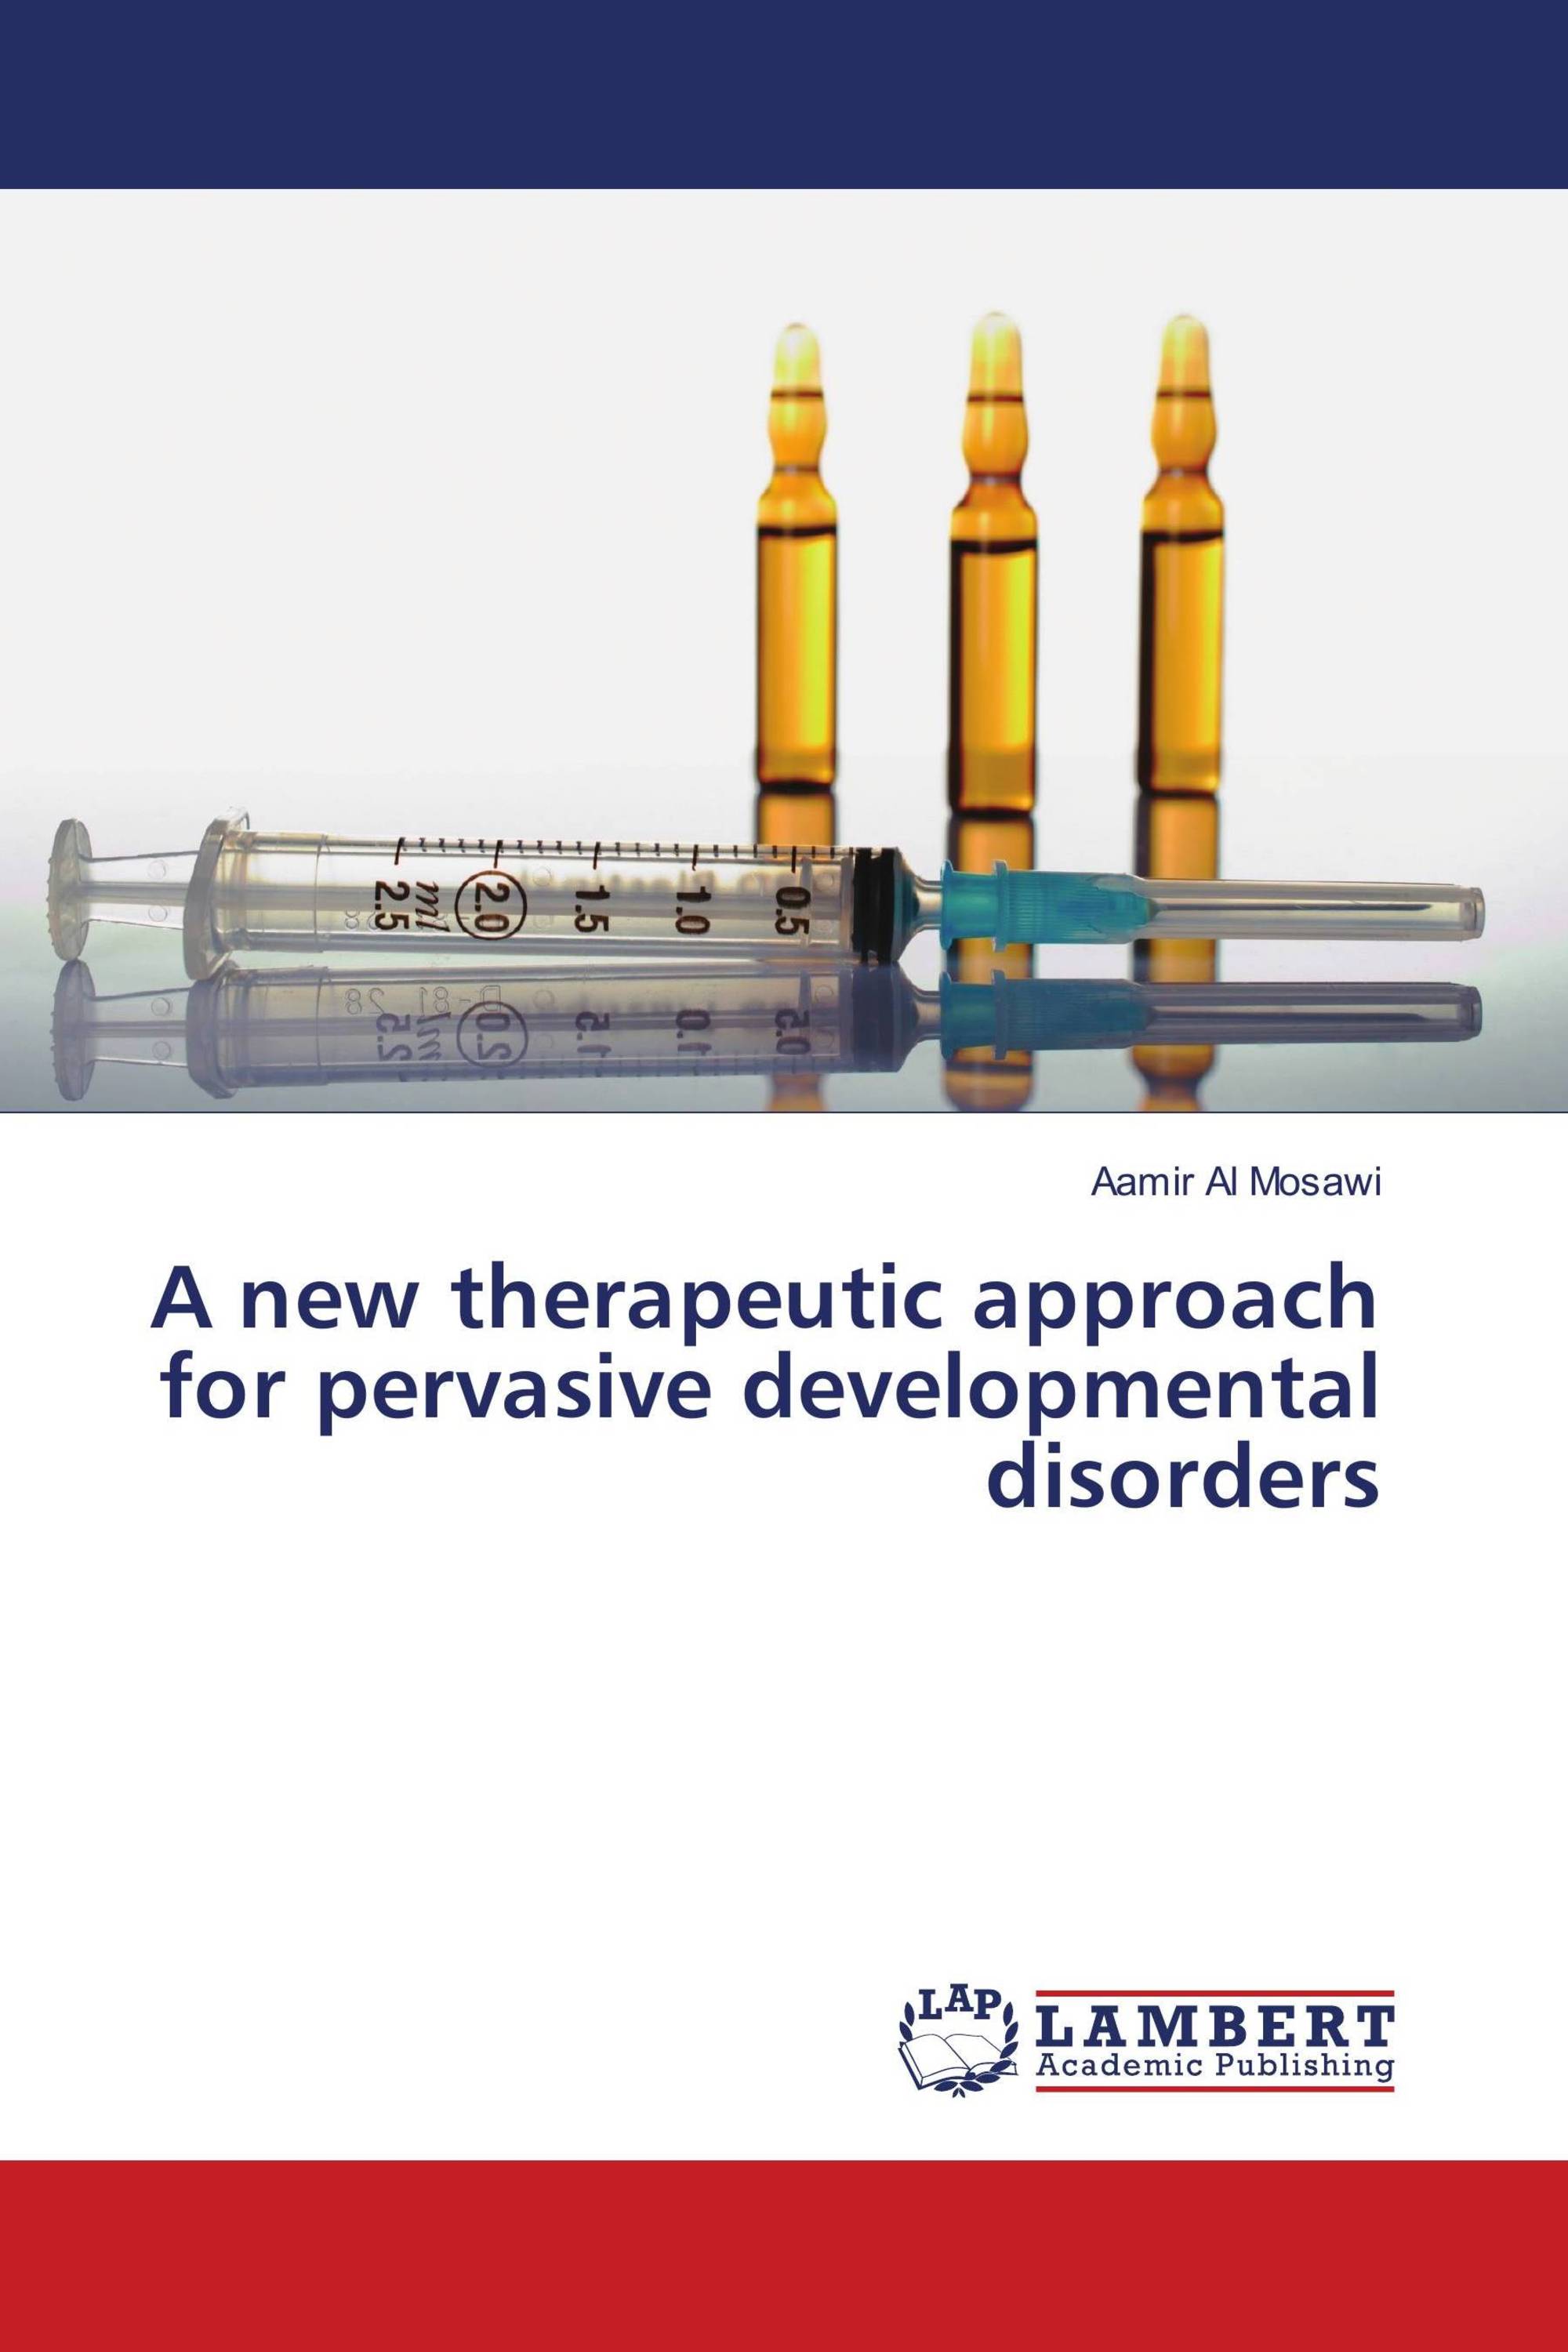 A new therapeutic approach for pervasive developmental disorders